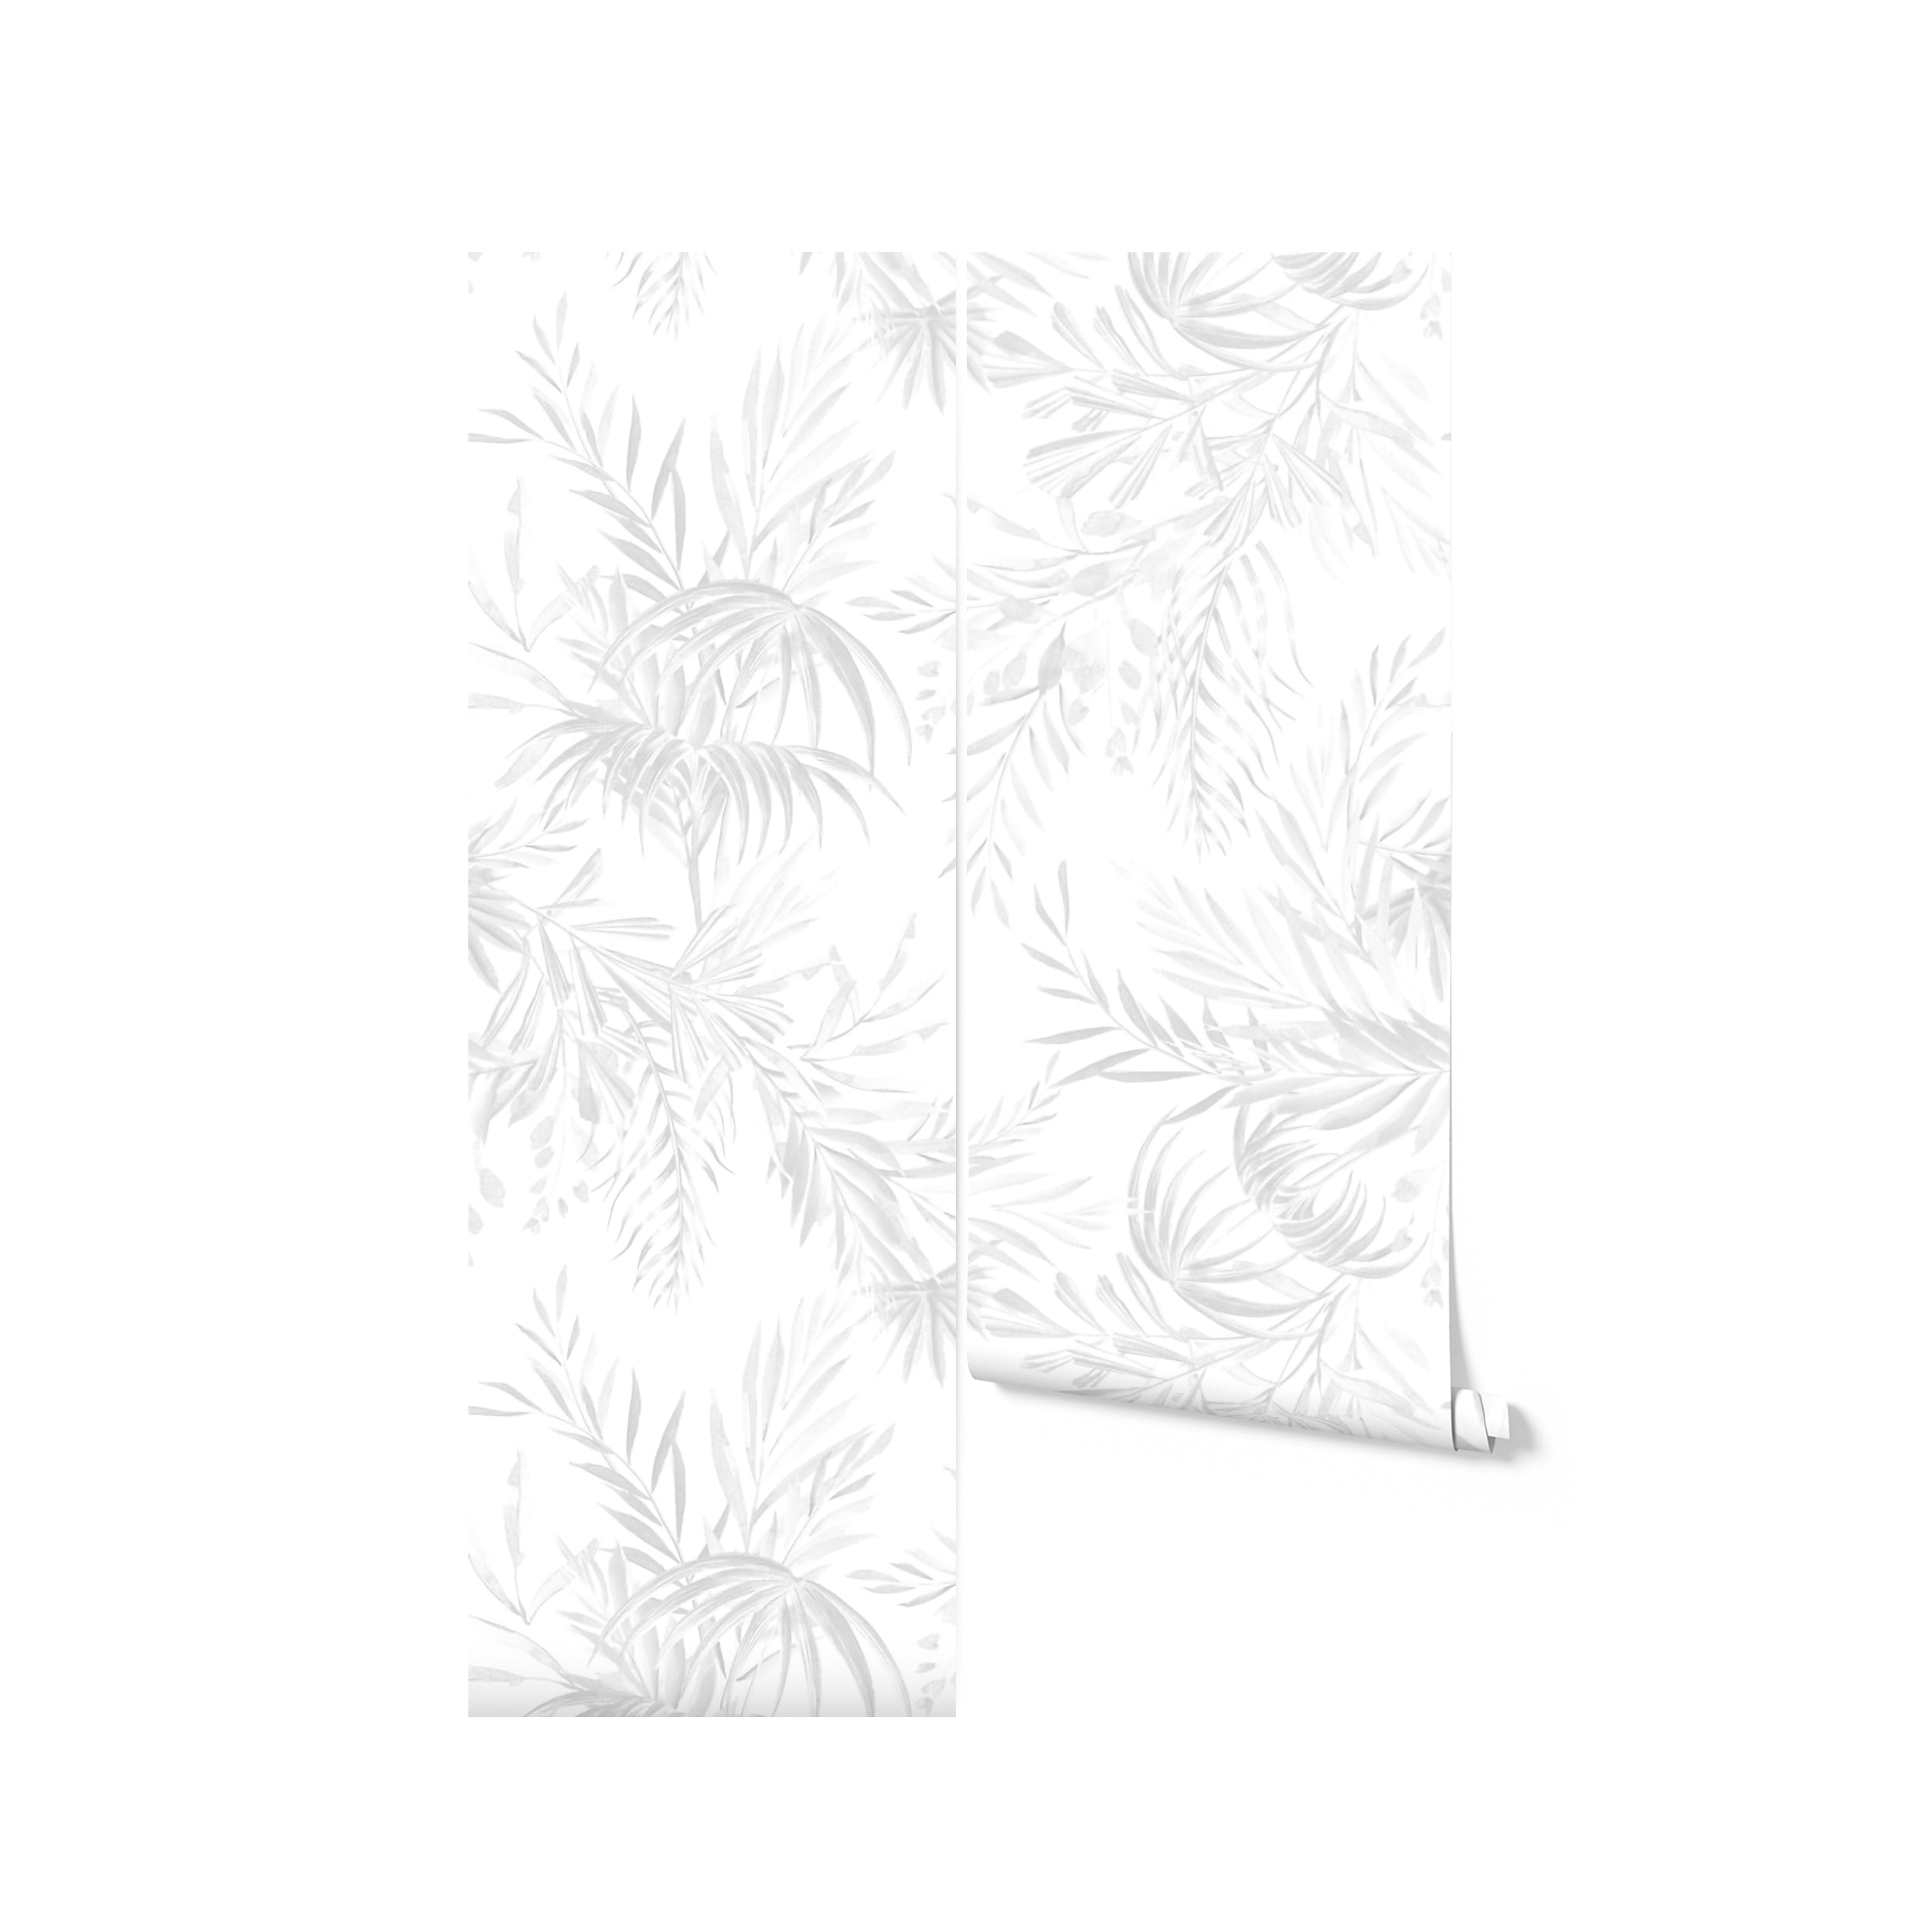 A single roll of Palm Springs Wallpaper features watercolor palm leaves in soft grey tones, suggesting a tranquil and chic aesthetic for walls in residential or commercial spaces. The roll gives a glimpse of the continuous tropical pattern that exudes a relaxing vibe.